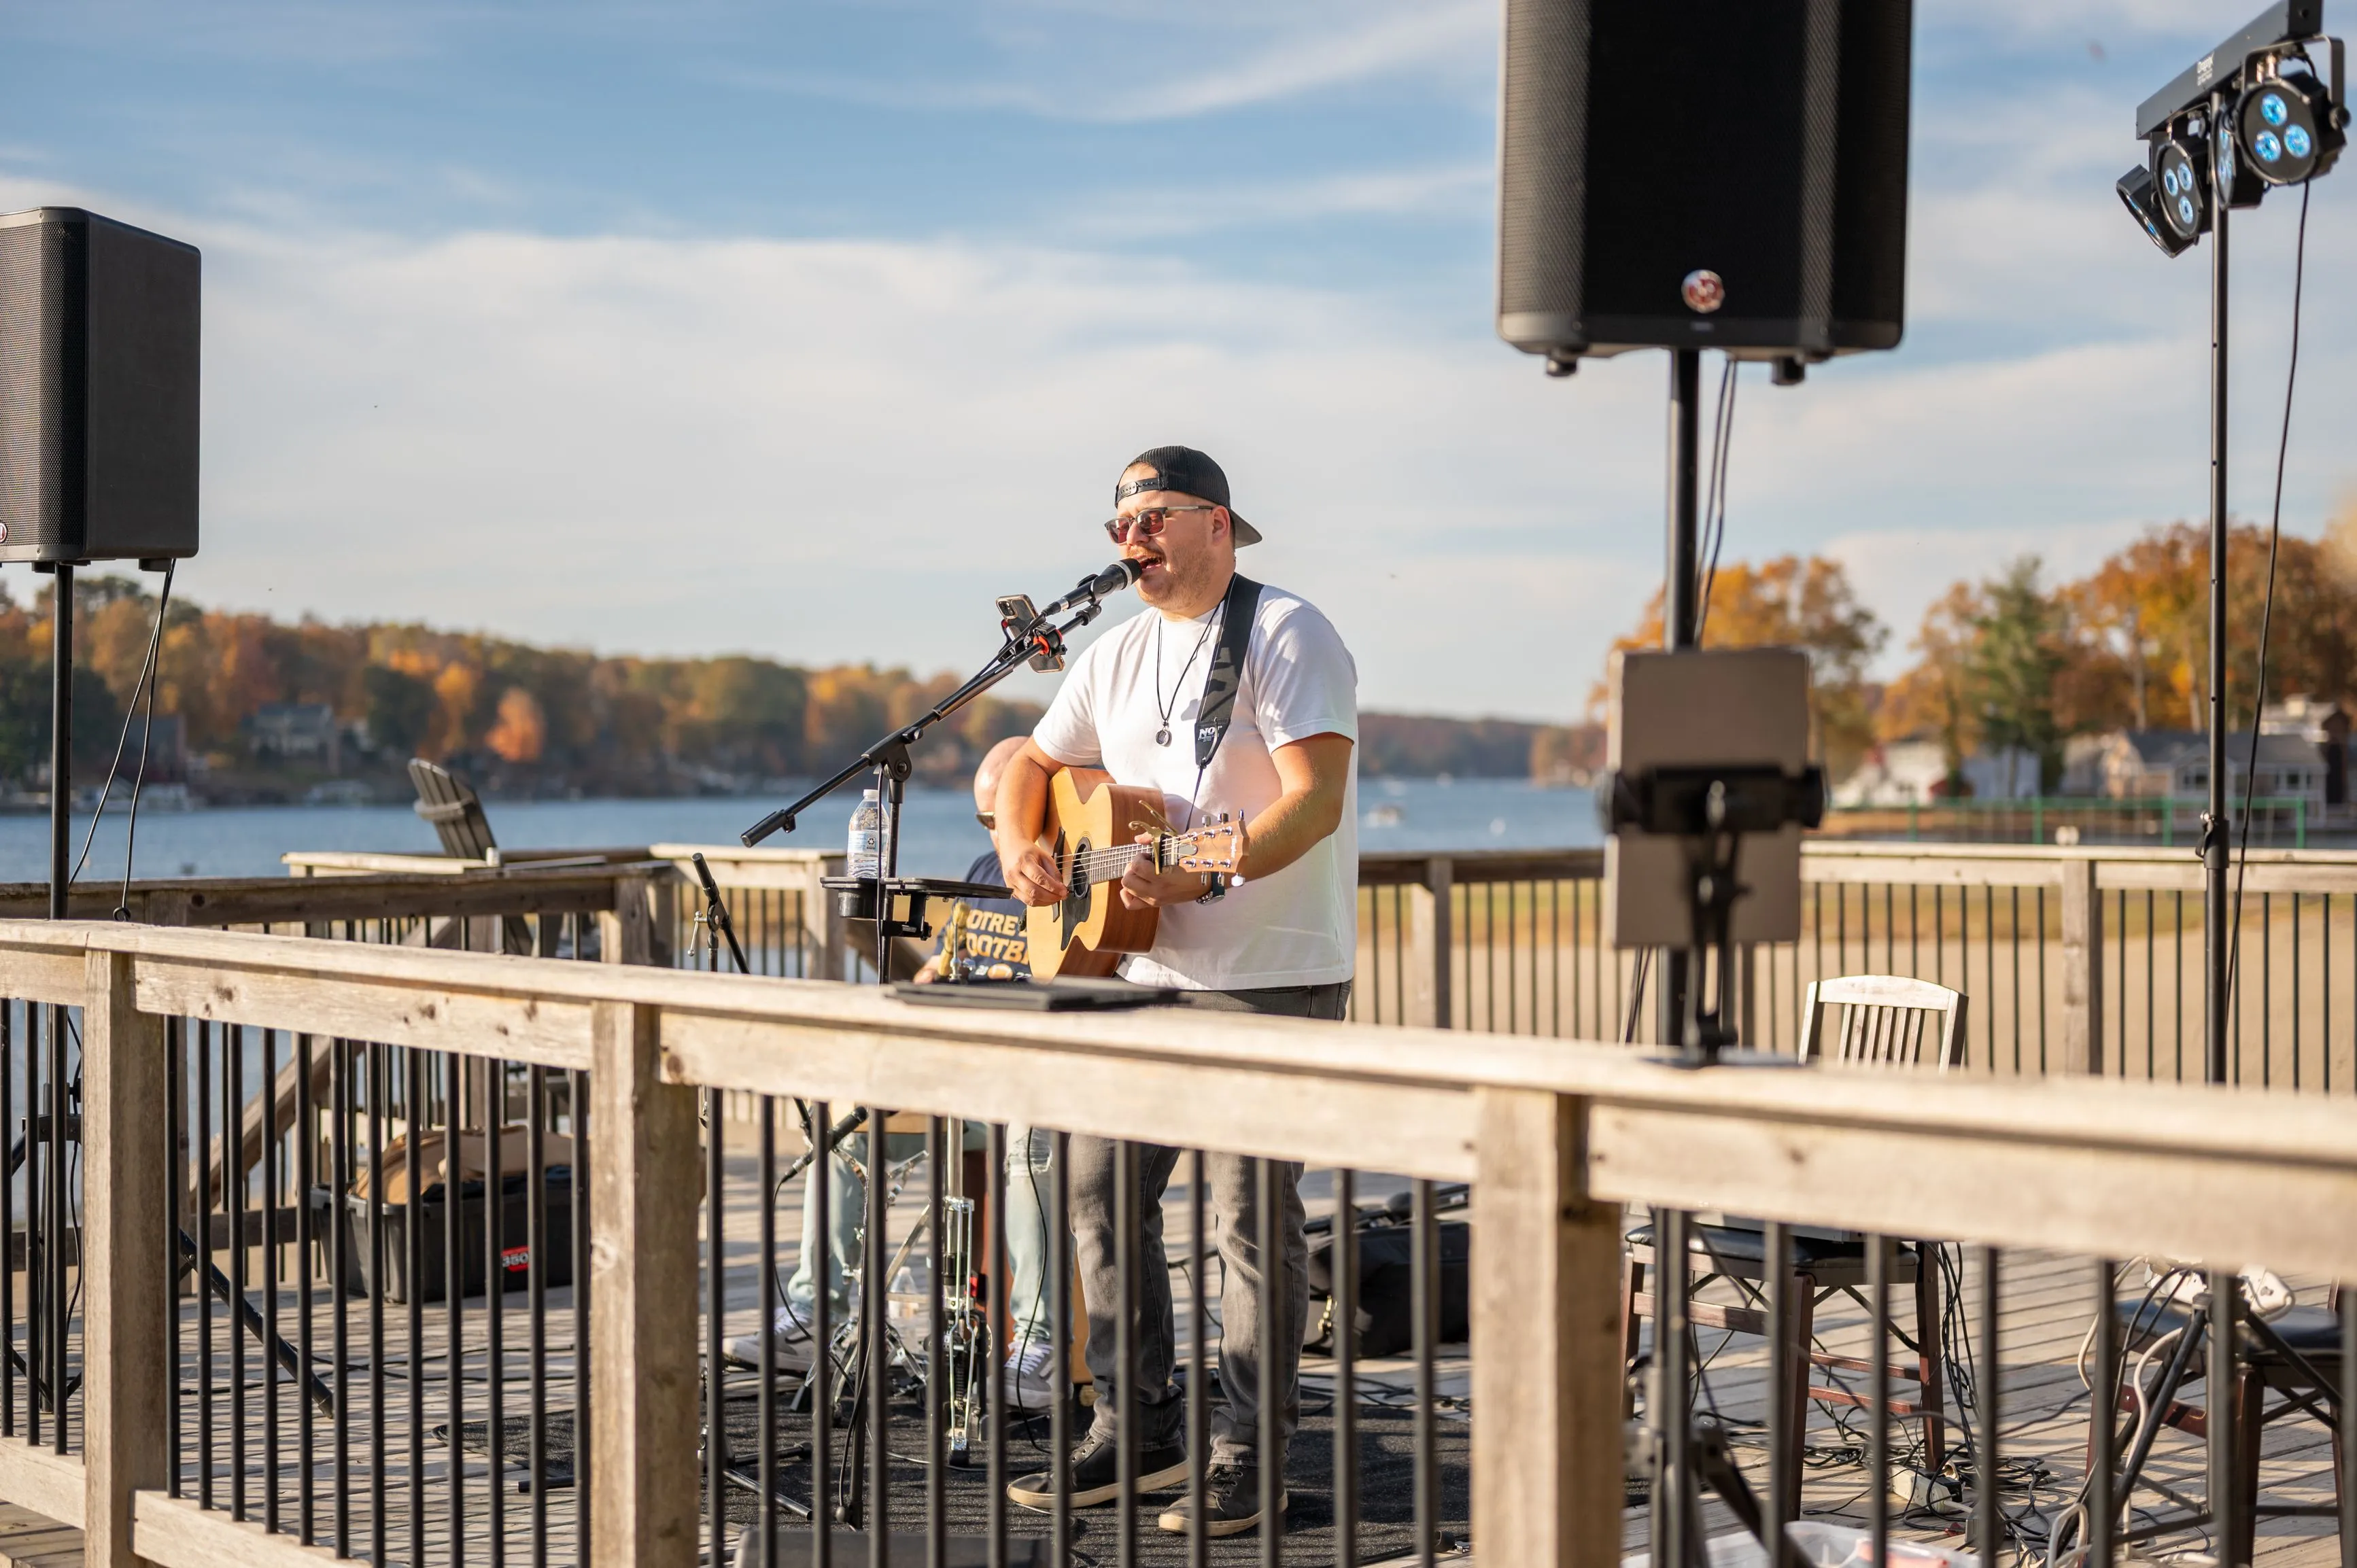 Musician playing guitar and singing into a microphone on an outdoor stage by a lake.